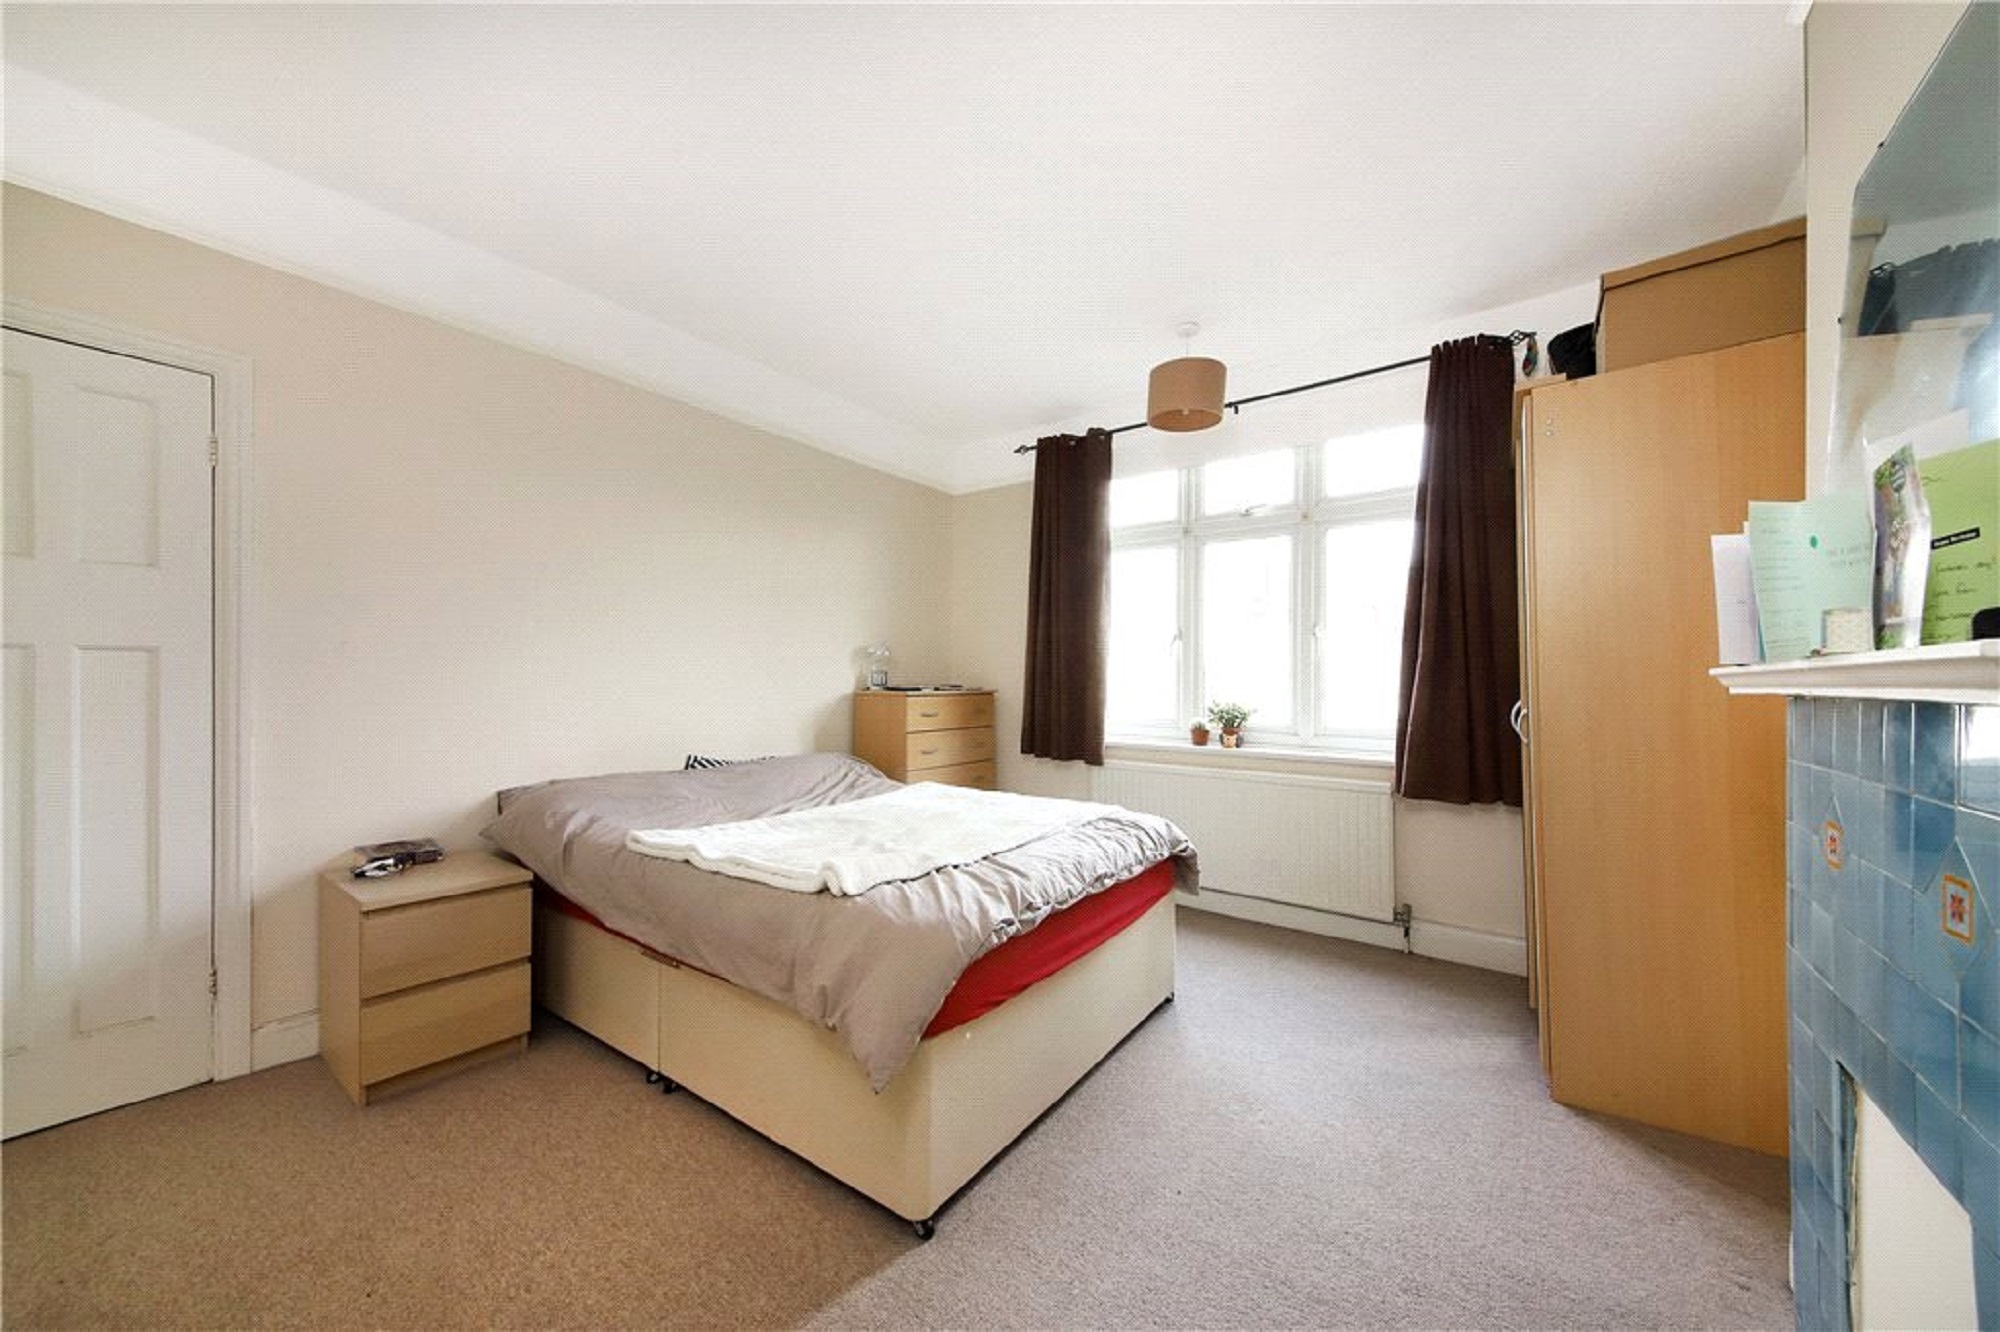 2 bedroom flat sharing in Bermondsey London, SE1 RoomsLocal image